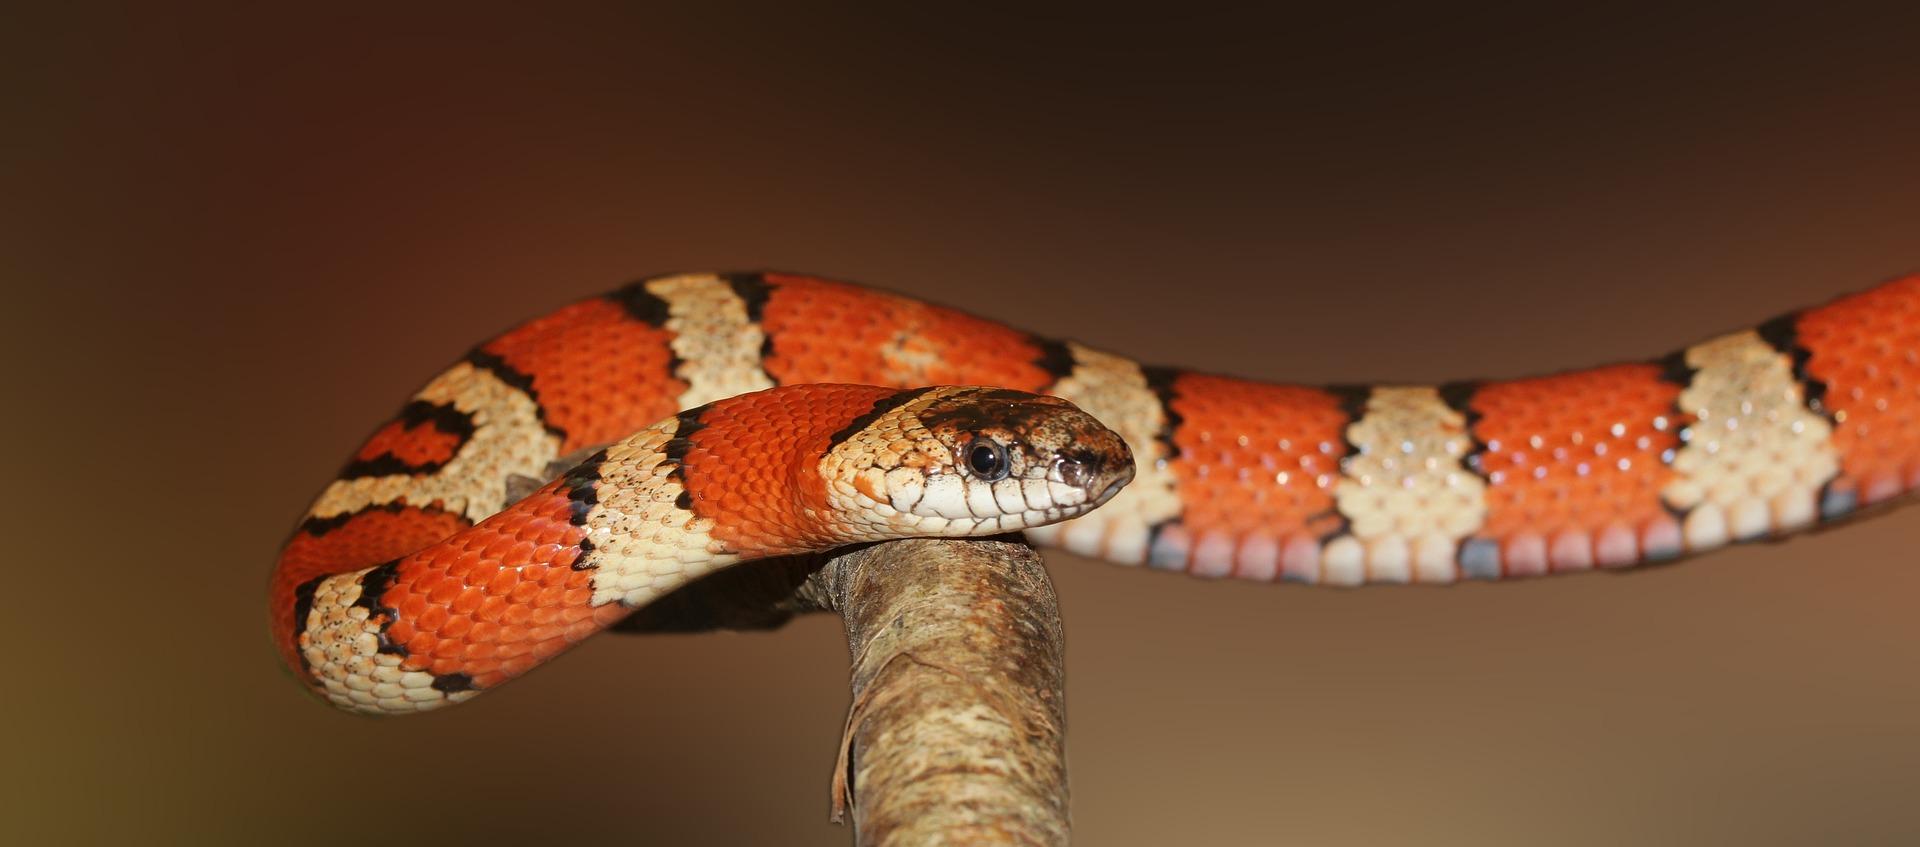 Image of a kingsnake on a branch